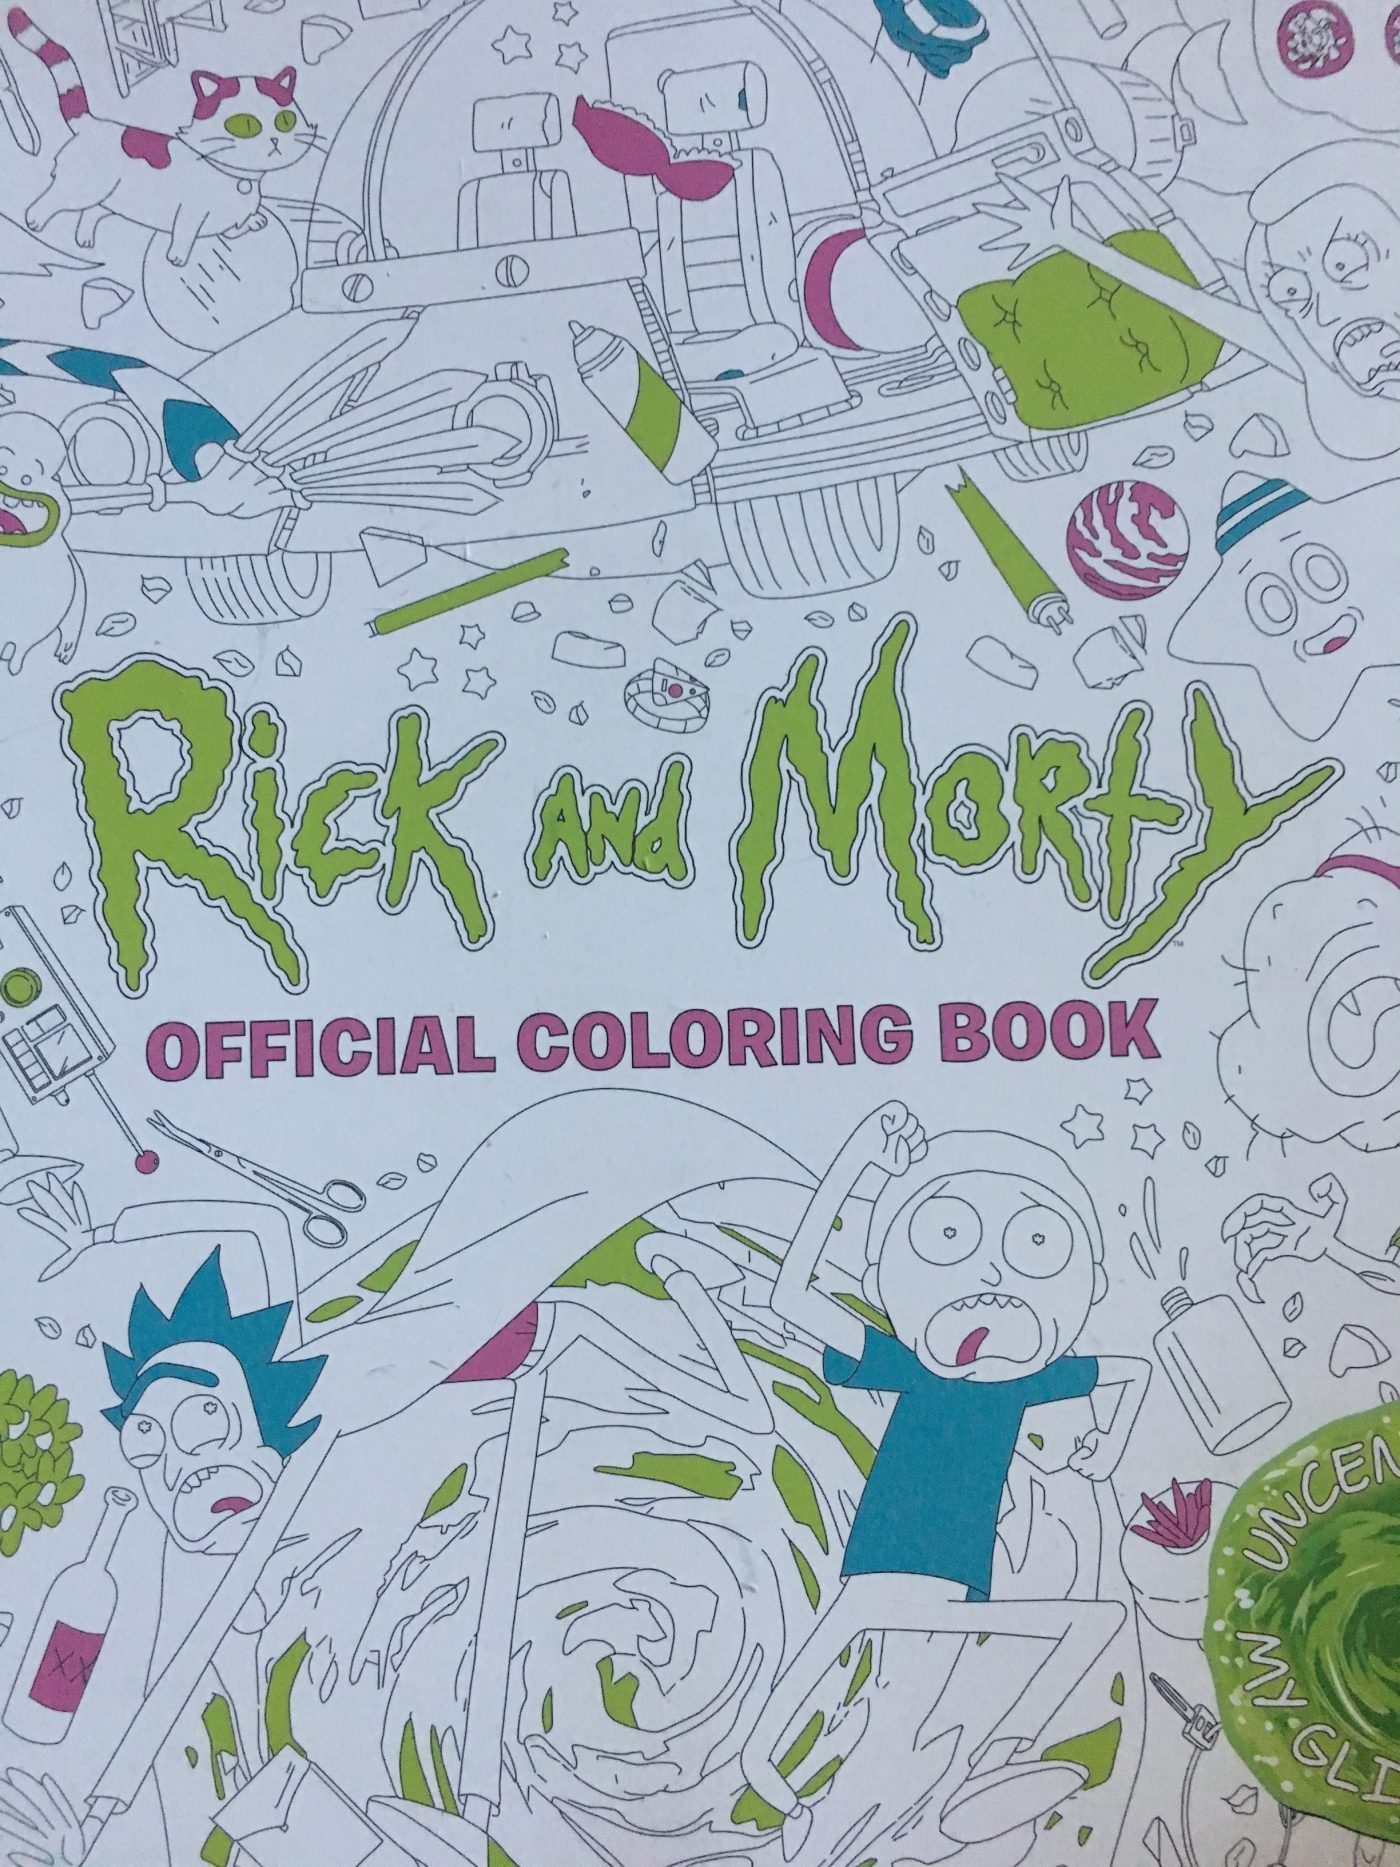 Wubalubadubdub! The Rick and Morty Official Coloring Book is an ornate adventure for all my glip glops!